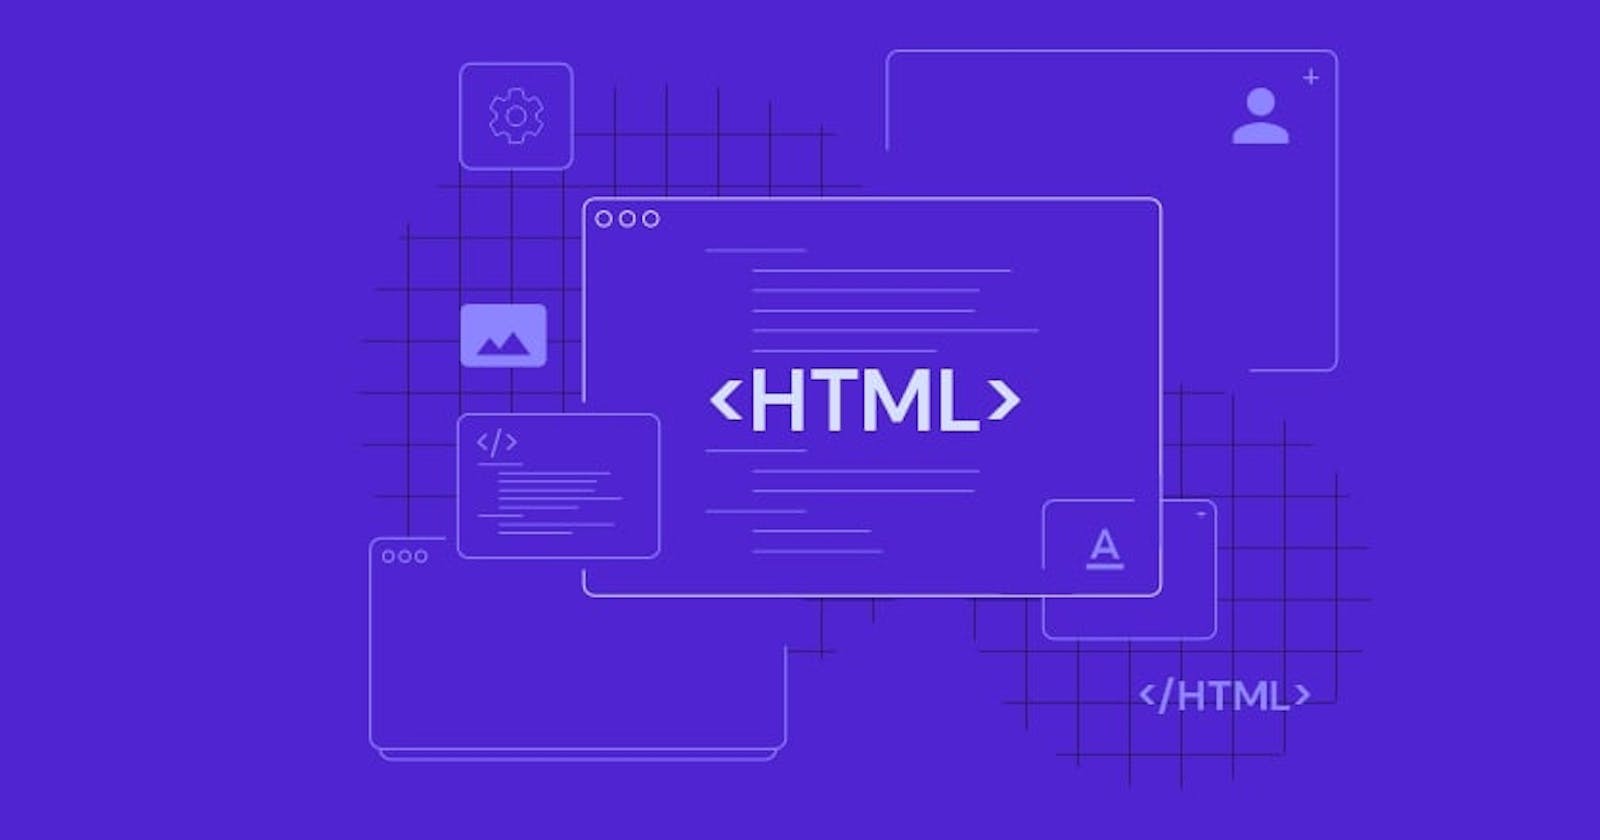 HTML: The building blocks of all websites